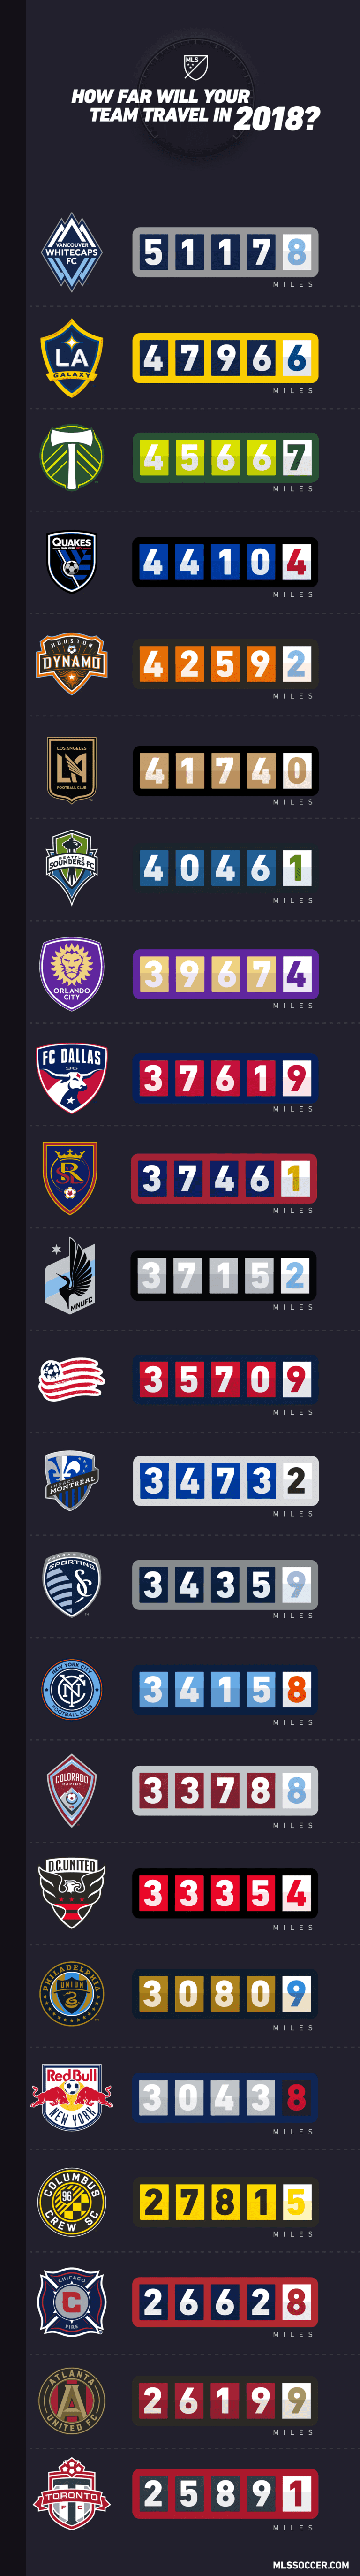 How many miles will the LA Galaxy travel during the 2018 season?  - https://league-mp7static.mlsdigital.net/images/2018-miles-infographic-.png?Y7wKuP_FrnPaFphLexcPiORcOE3sF1Z2